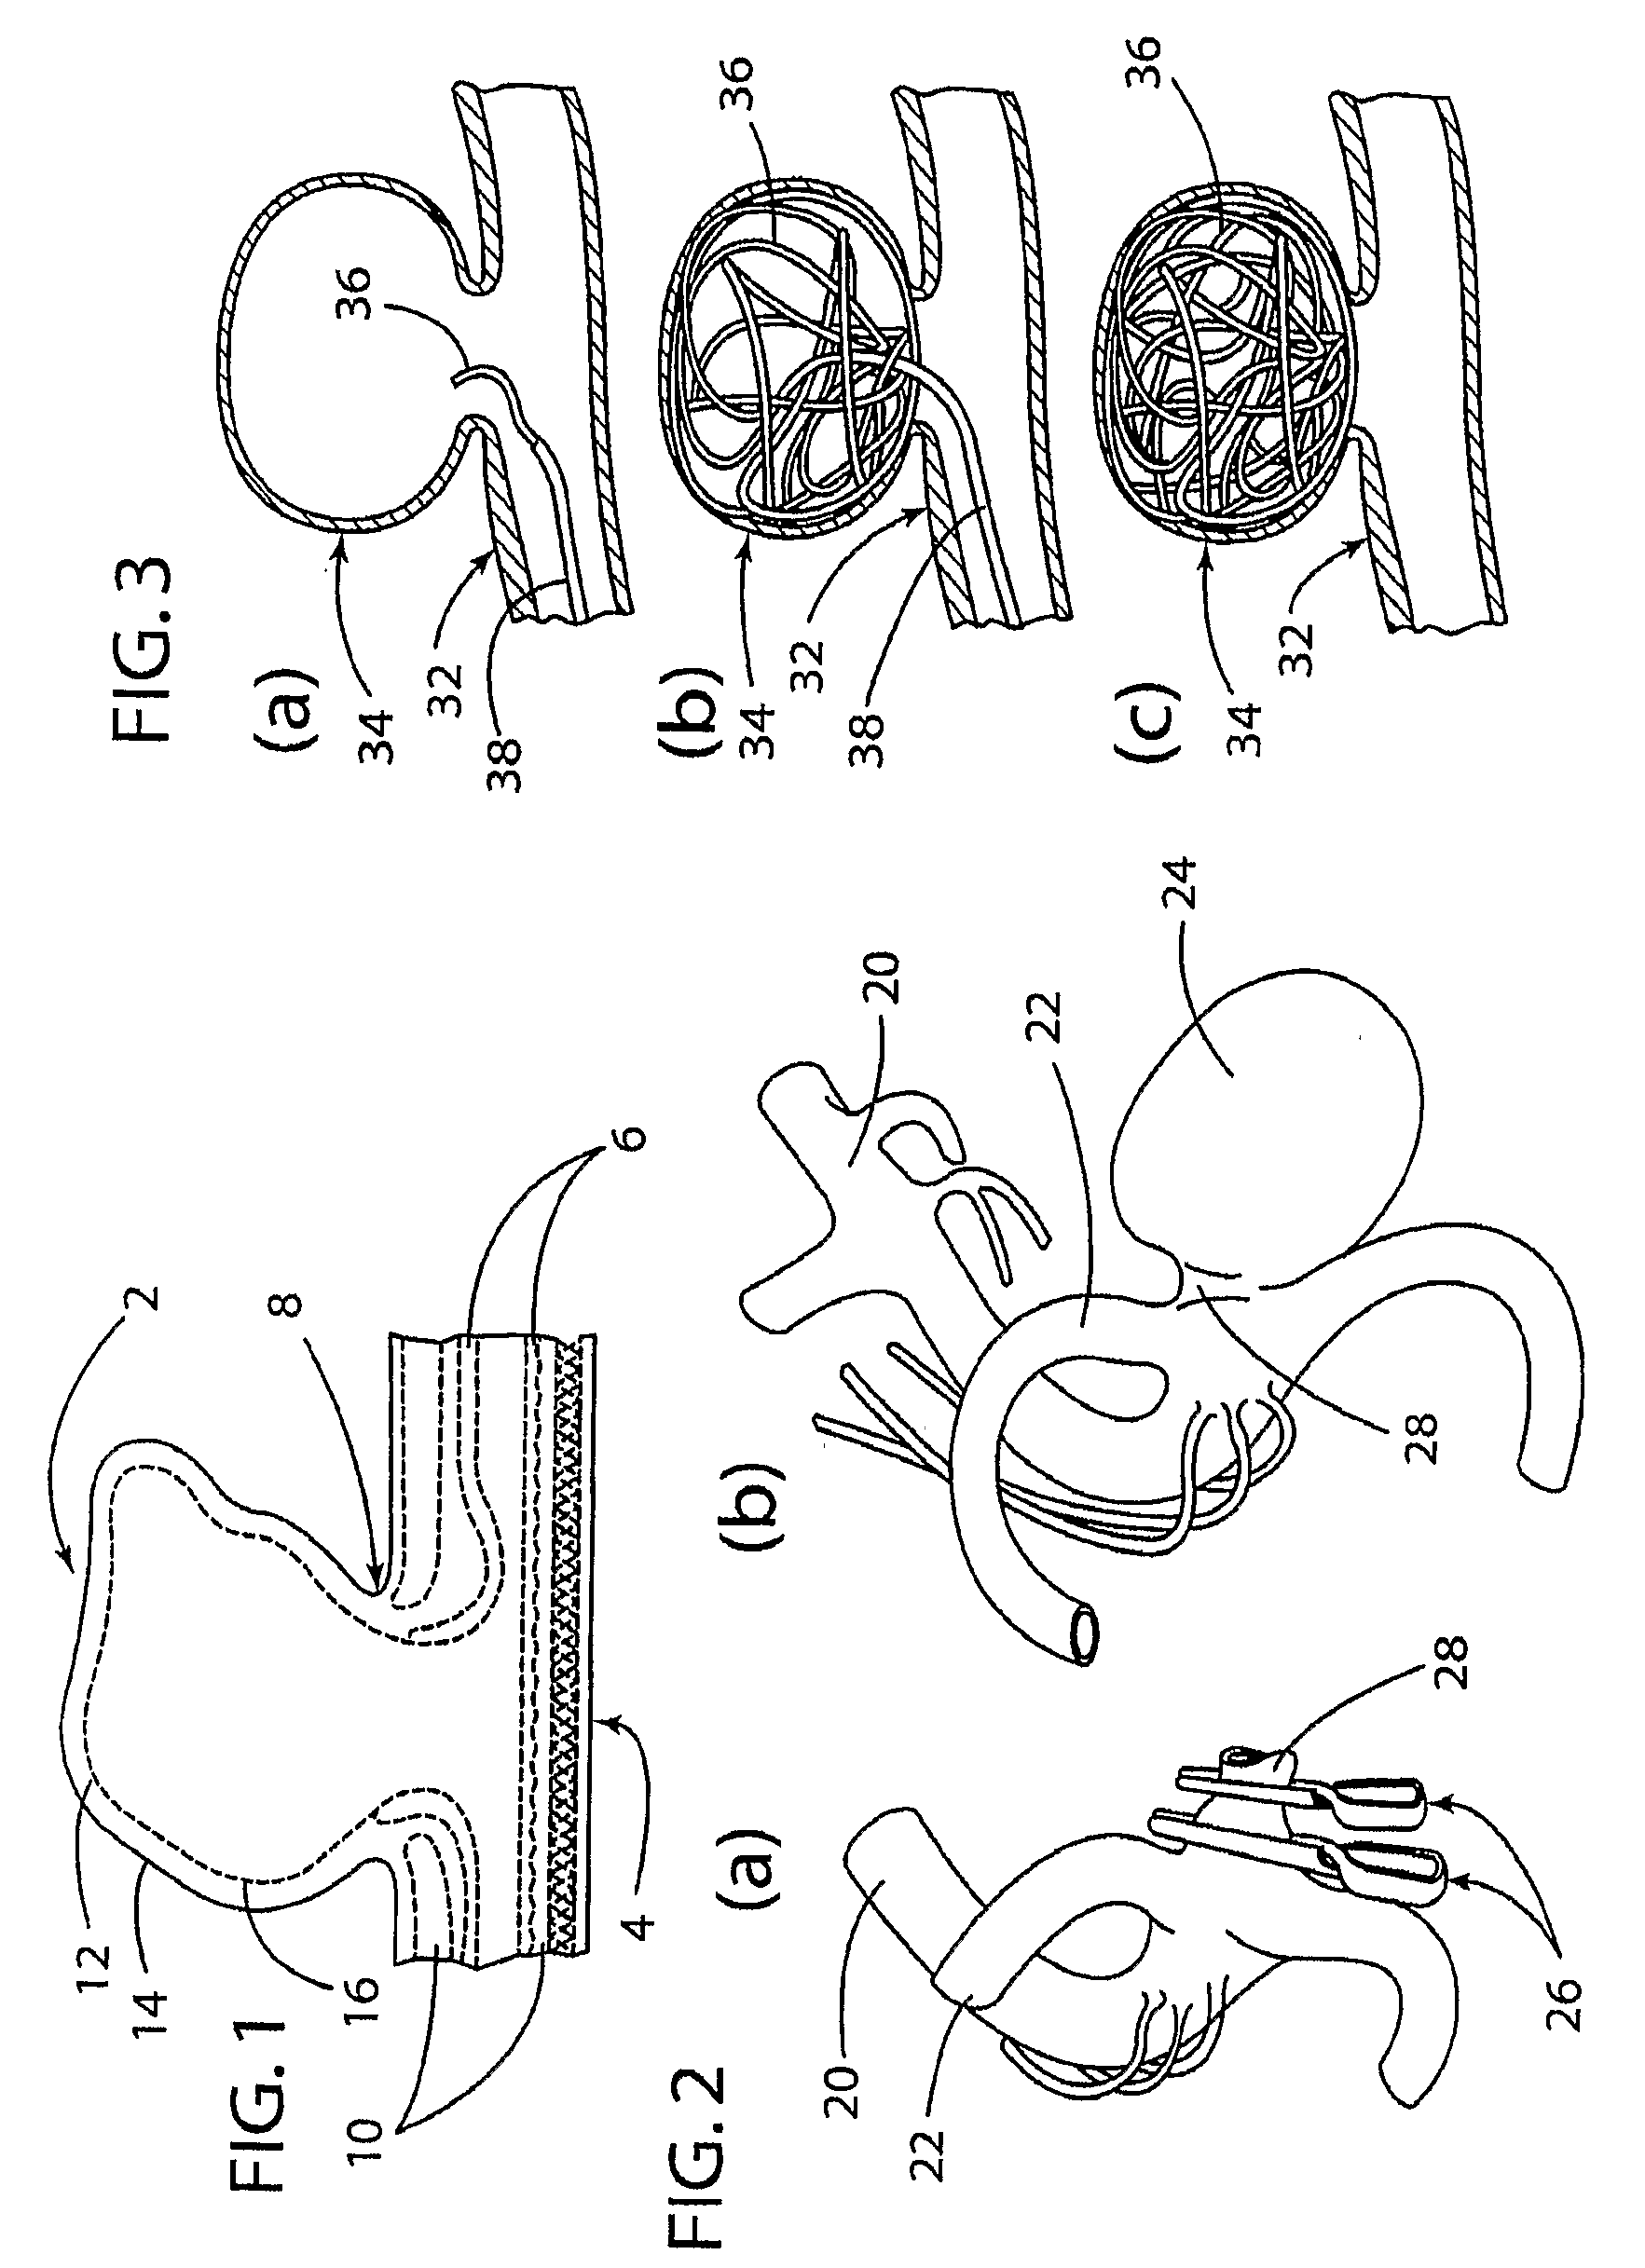 Method for non-invasive detection and treatment of cerebral aneurysms